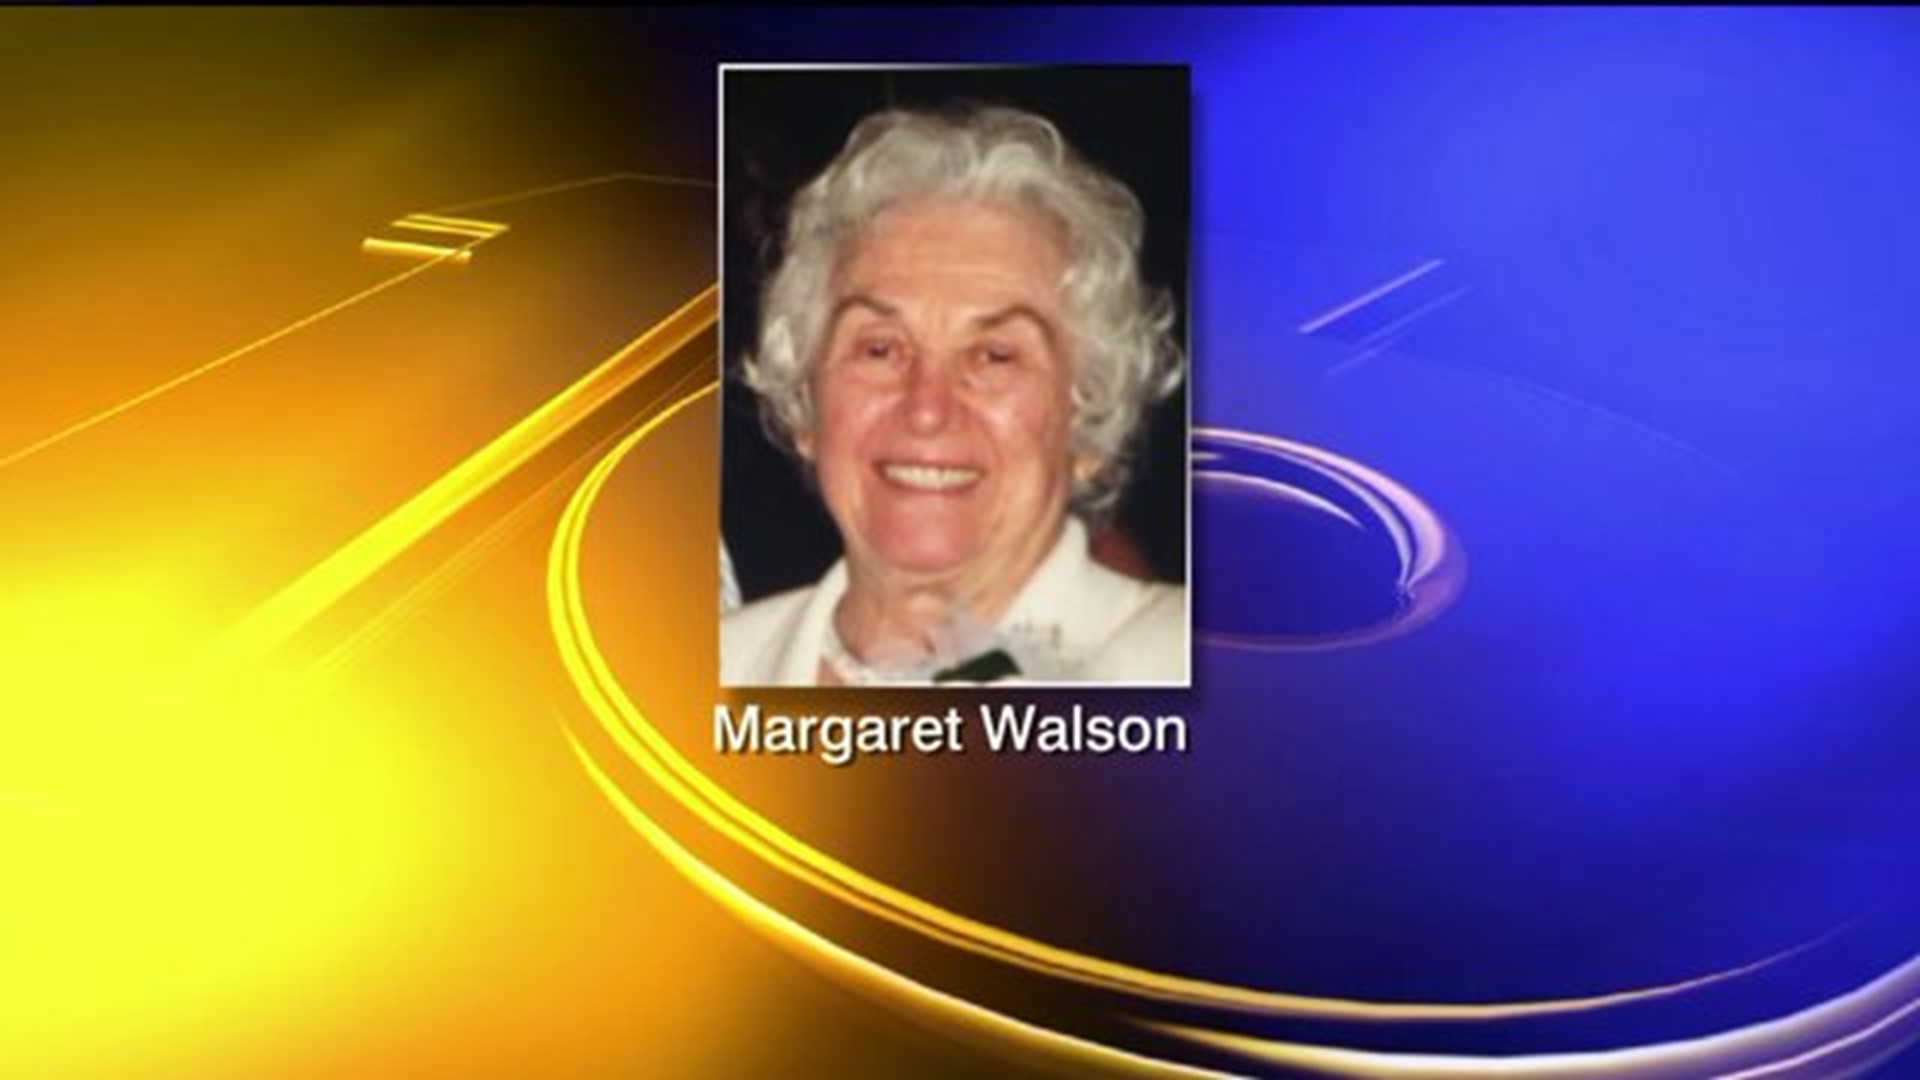 Margaret Walson, Co-Founder of Service Electric Cable Television Dies